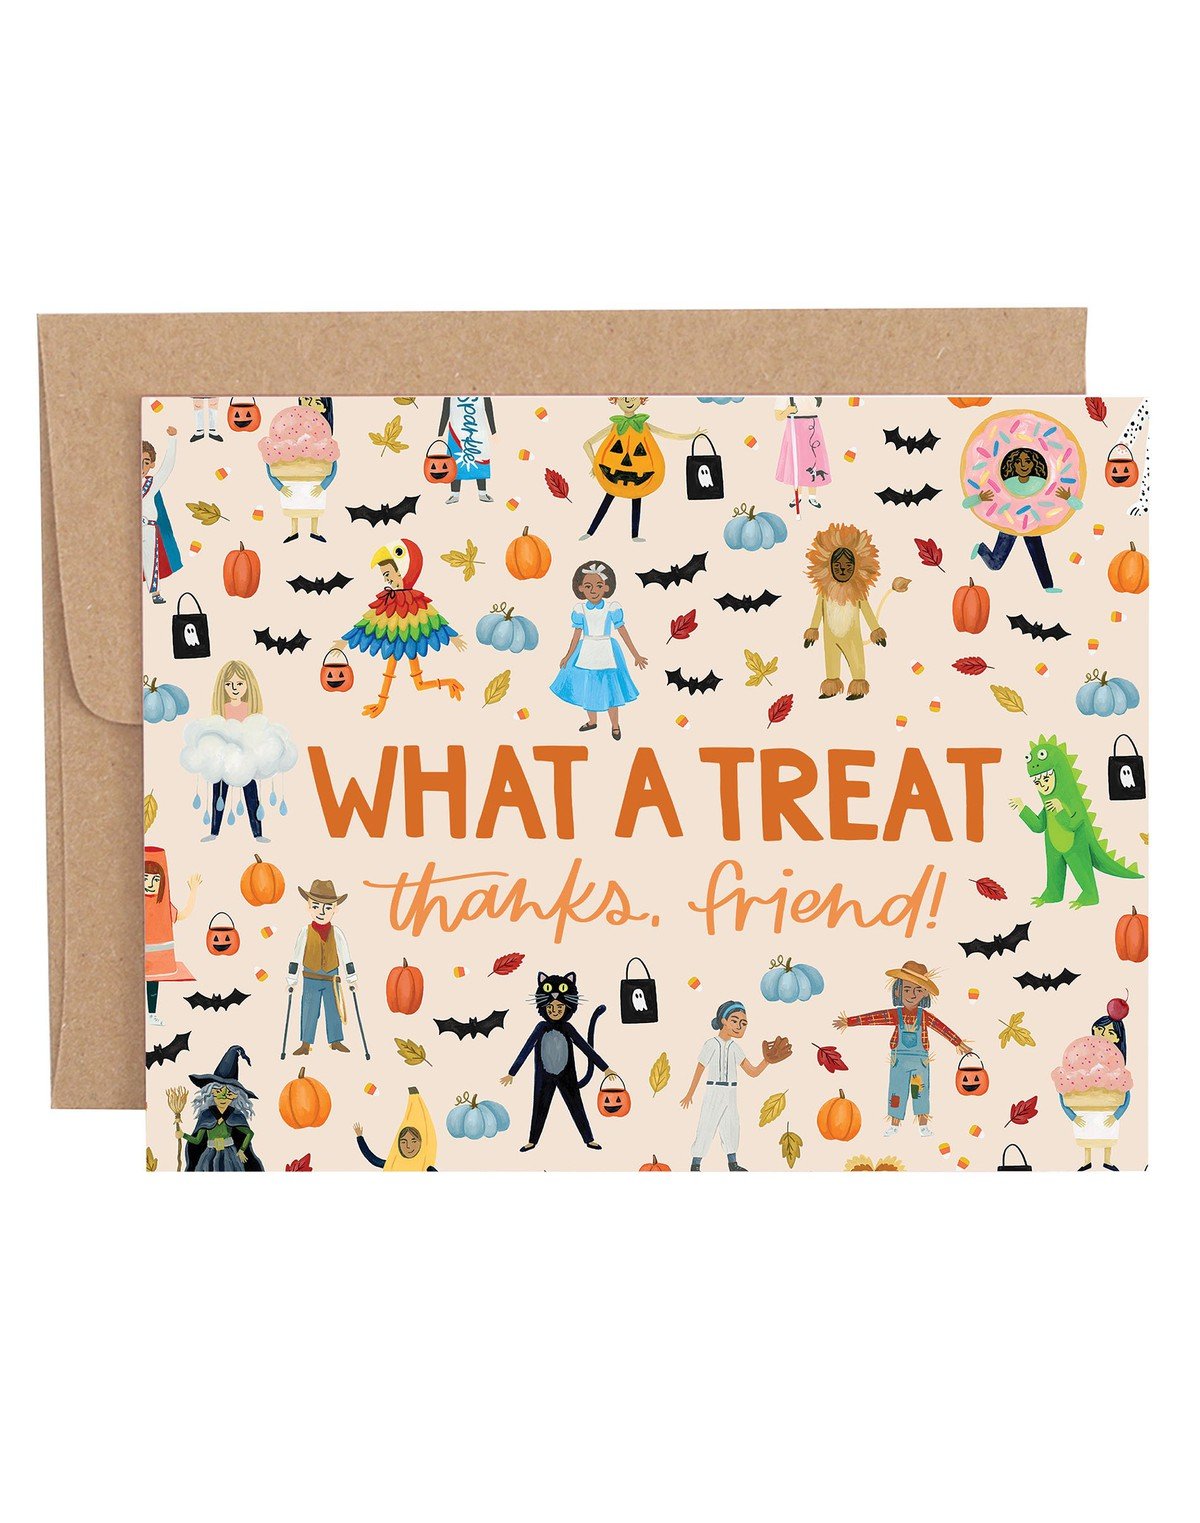 What A Treat Halloween Greeting Card item